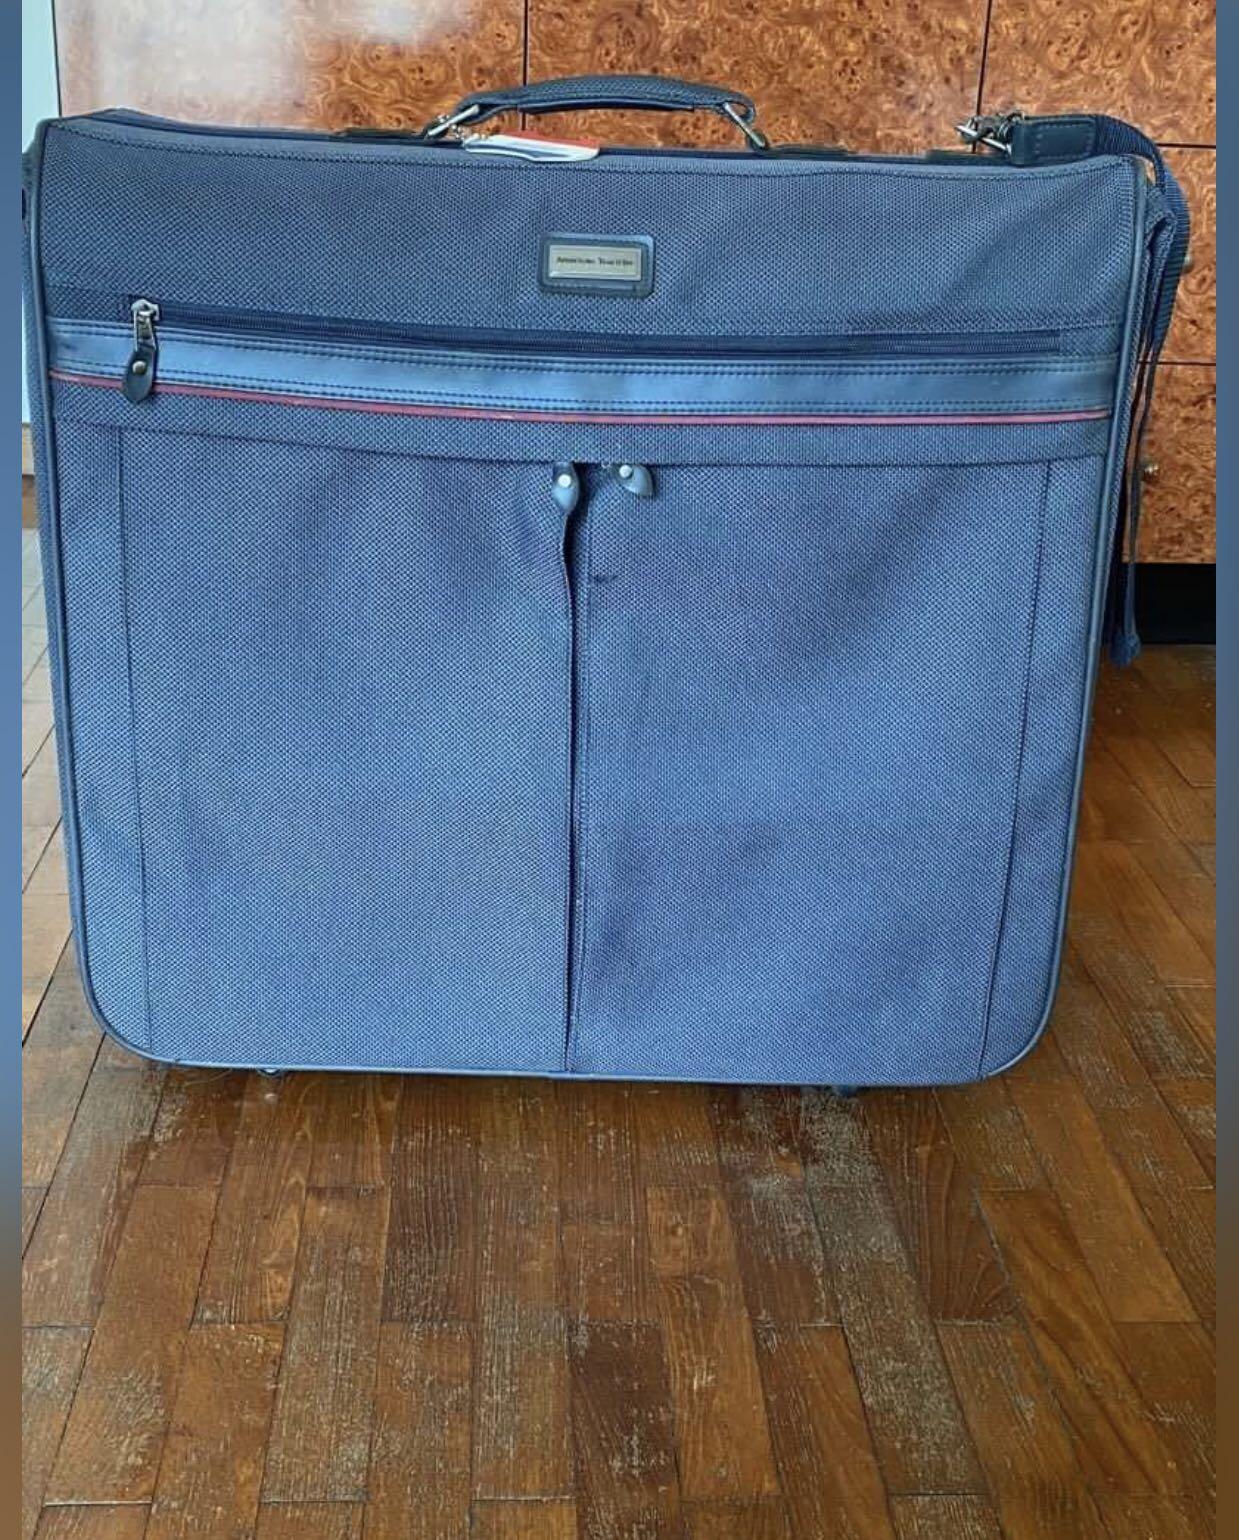 American Tourister business carry-on-luggage with wheels, Hobbies ...